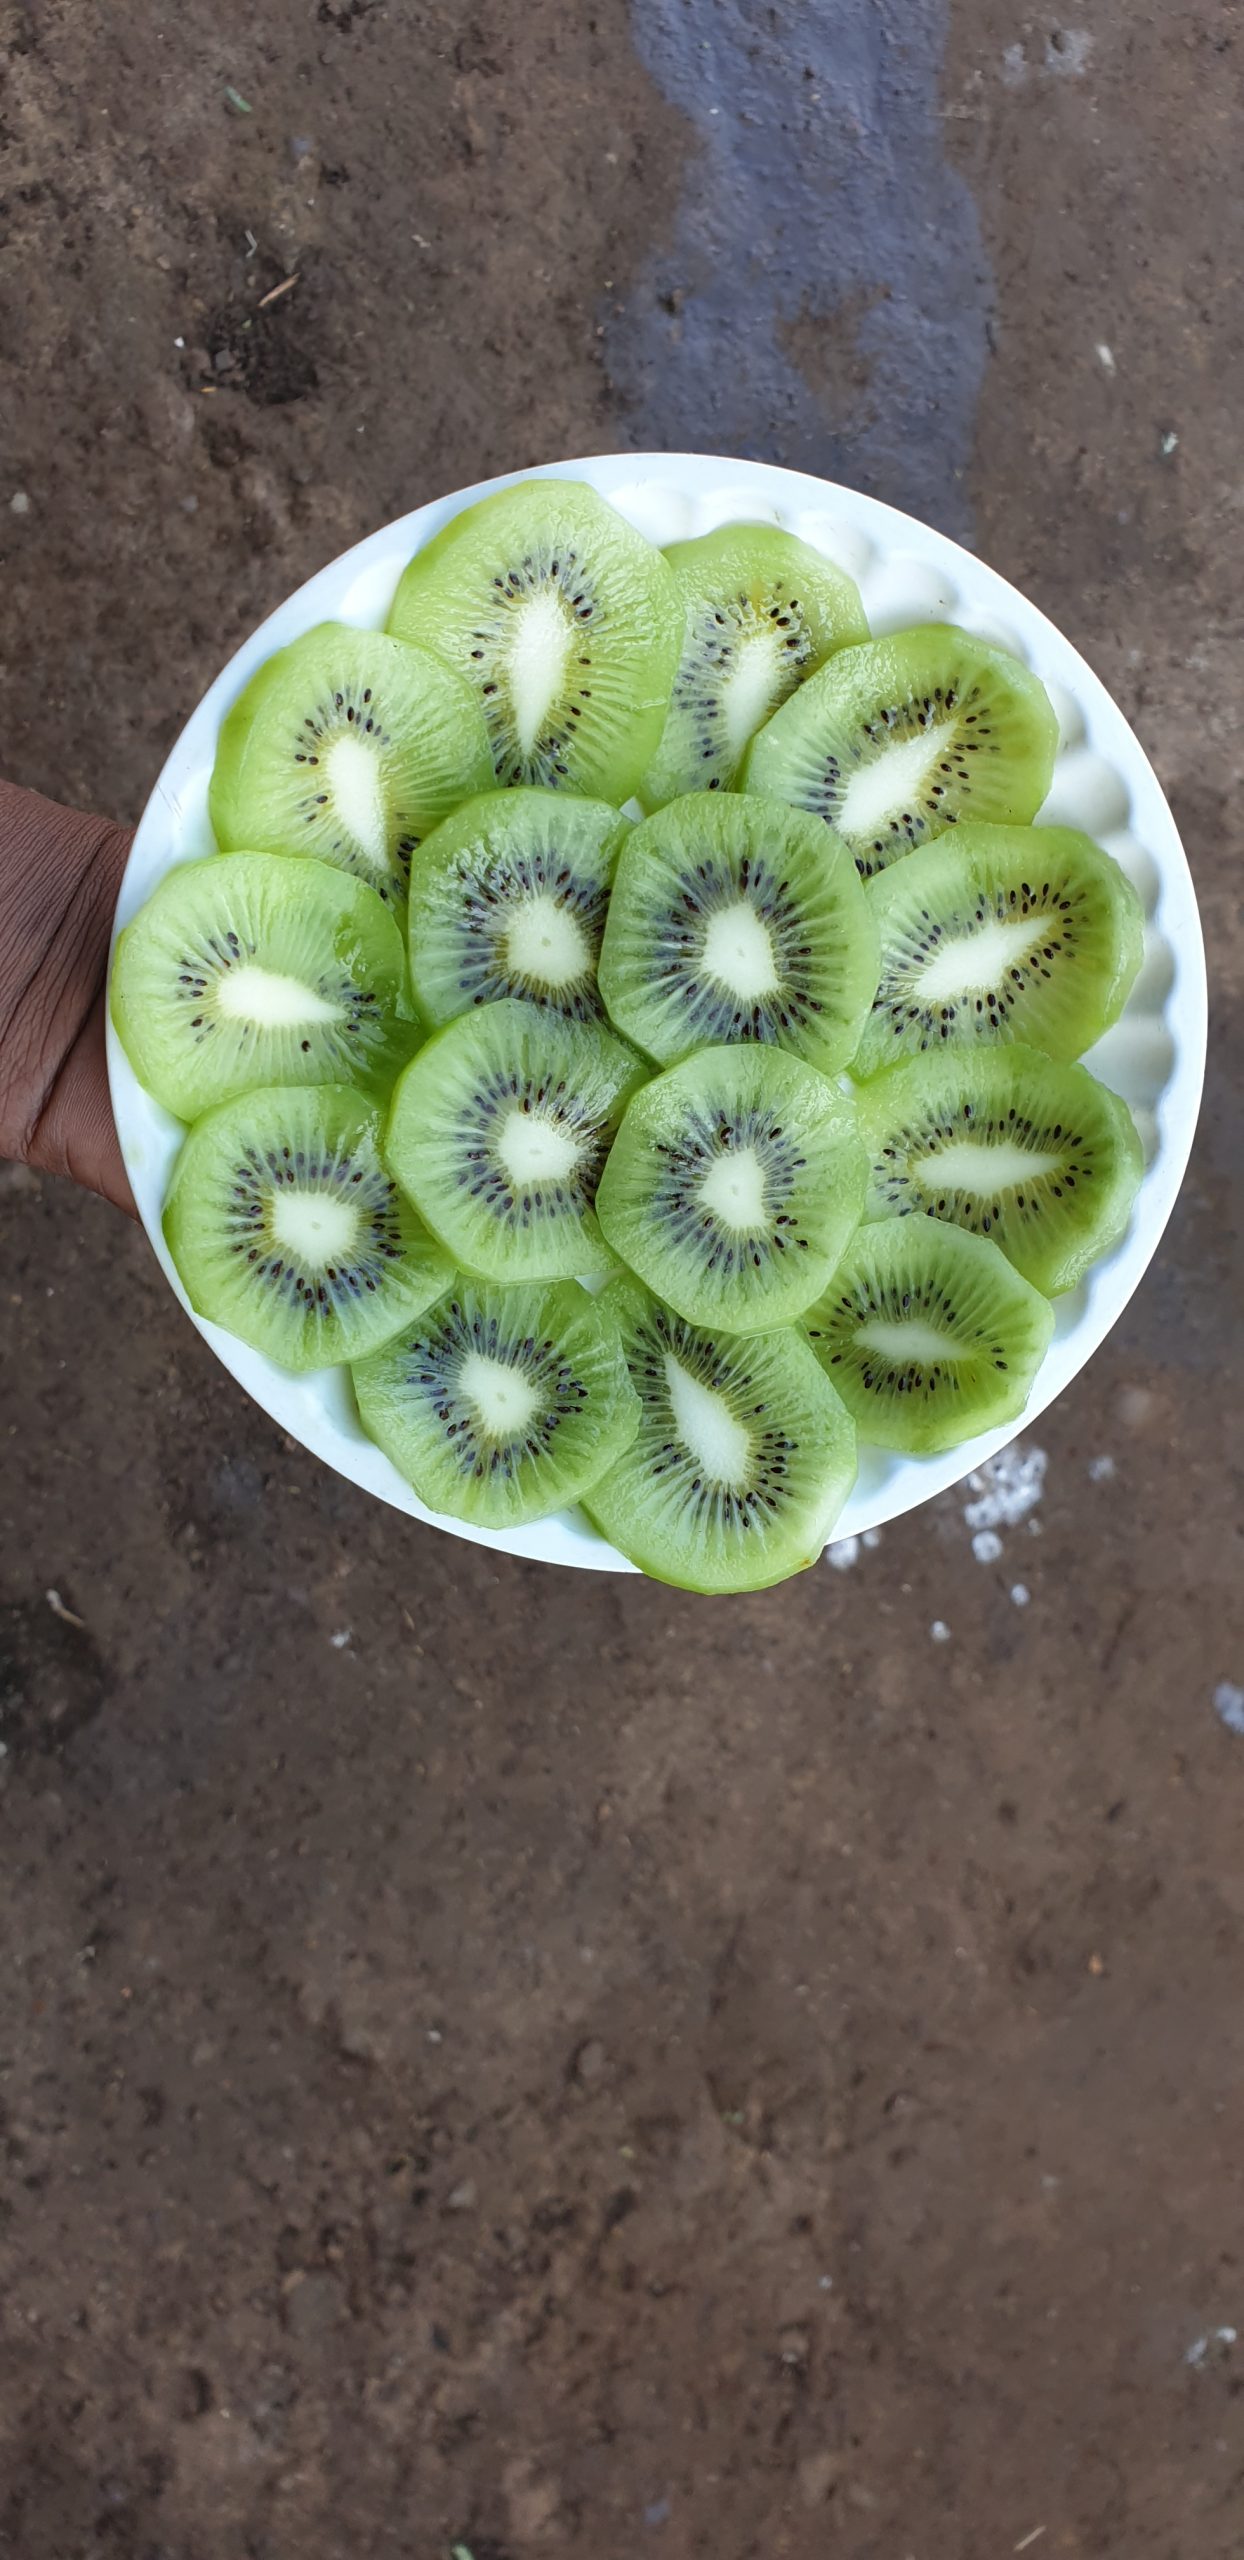 Kiwi fruit slices in a plate